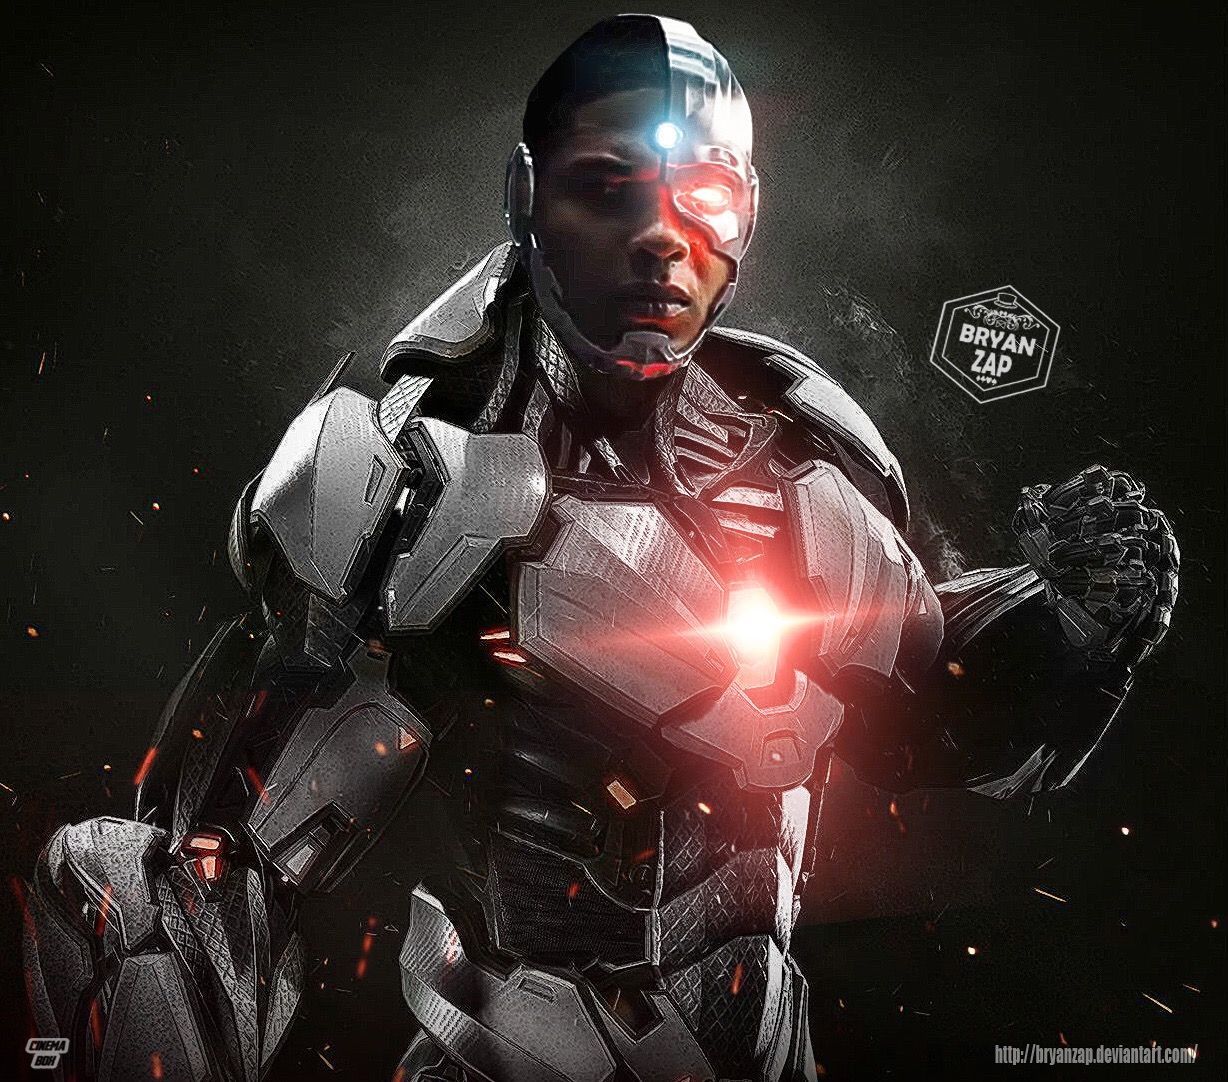 This would be the best look for Cyborg in the future. Make it happen!. BryanZap. Cyborg dc comics, Dc comics wallpaper, Dc comics heroes